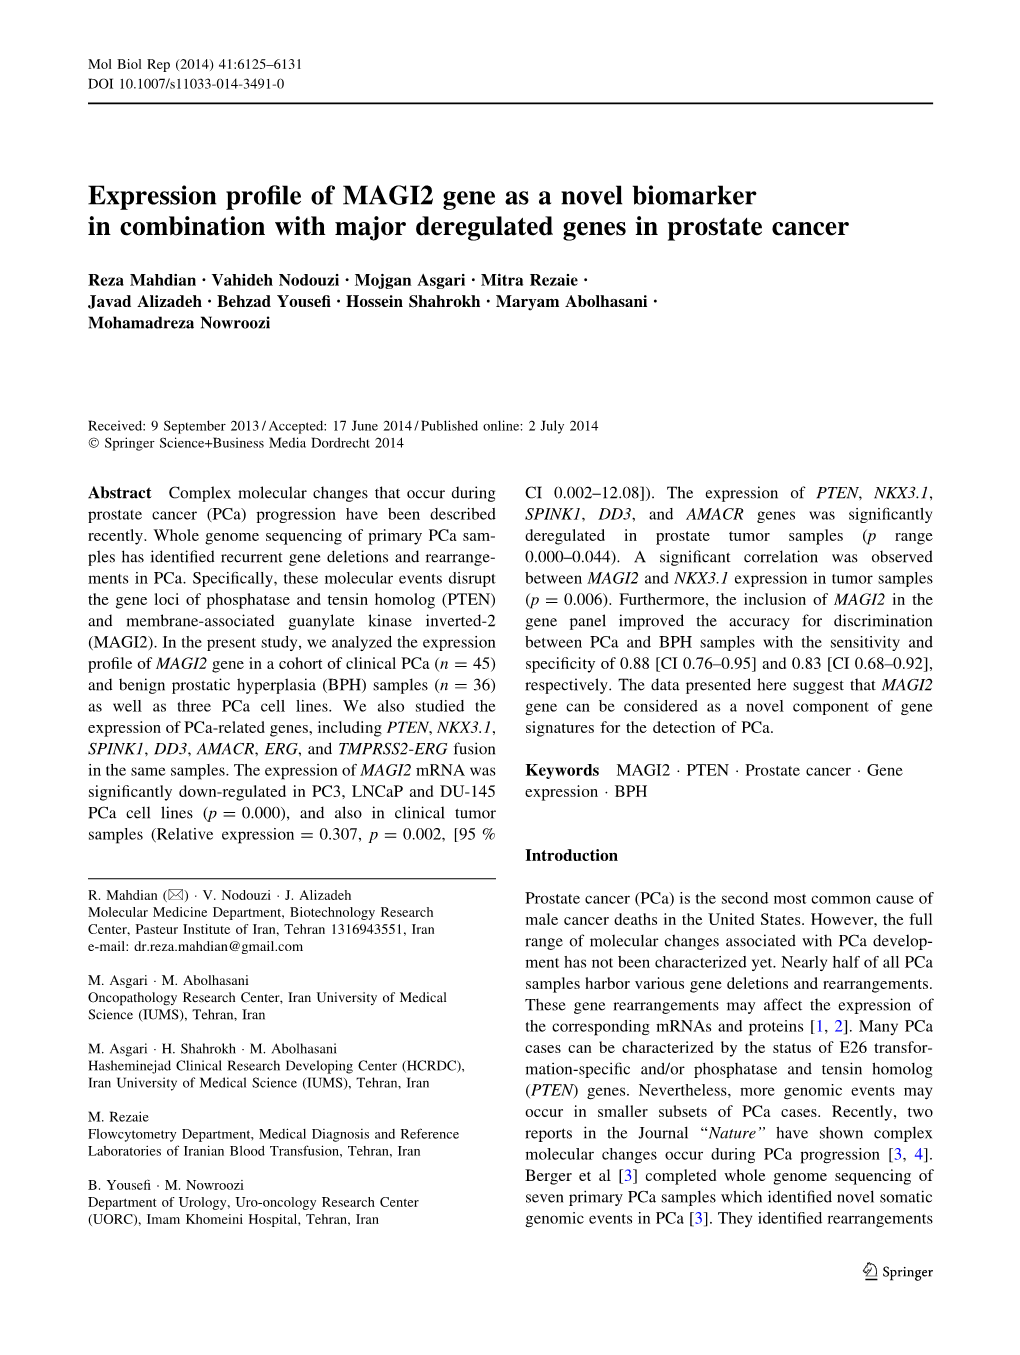 Expression Profile of MAGI2 Gene As a Novel Biomarker in Combination